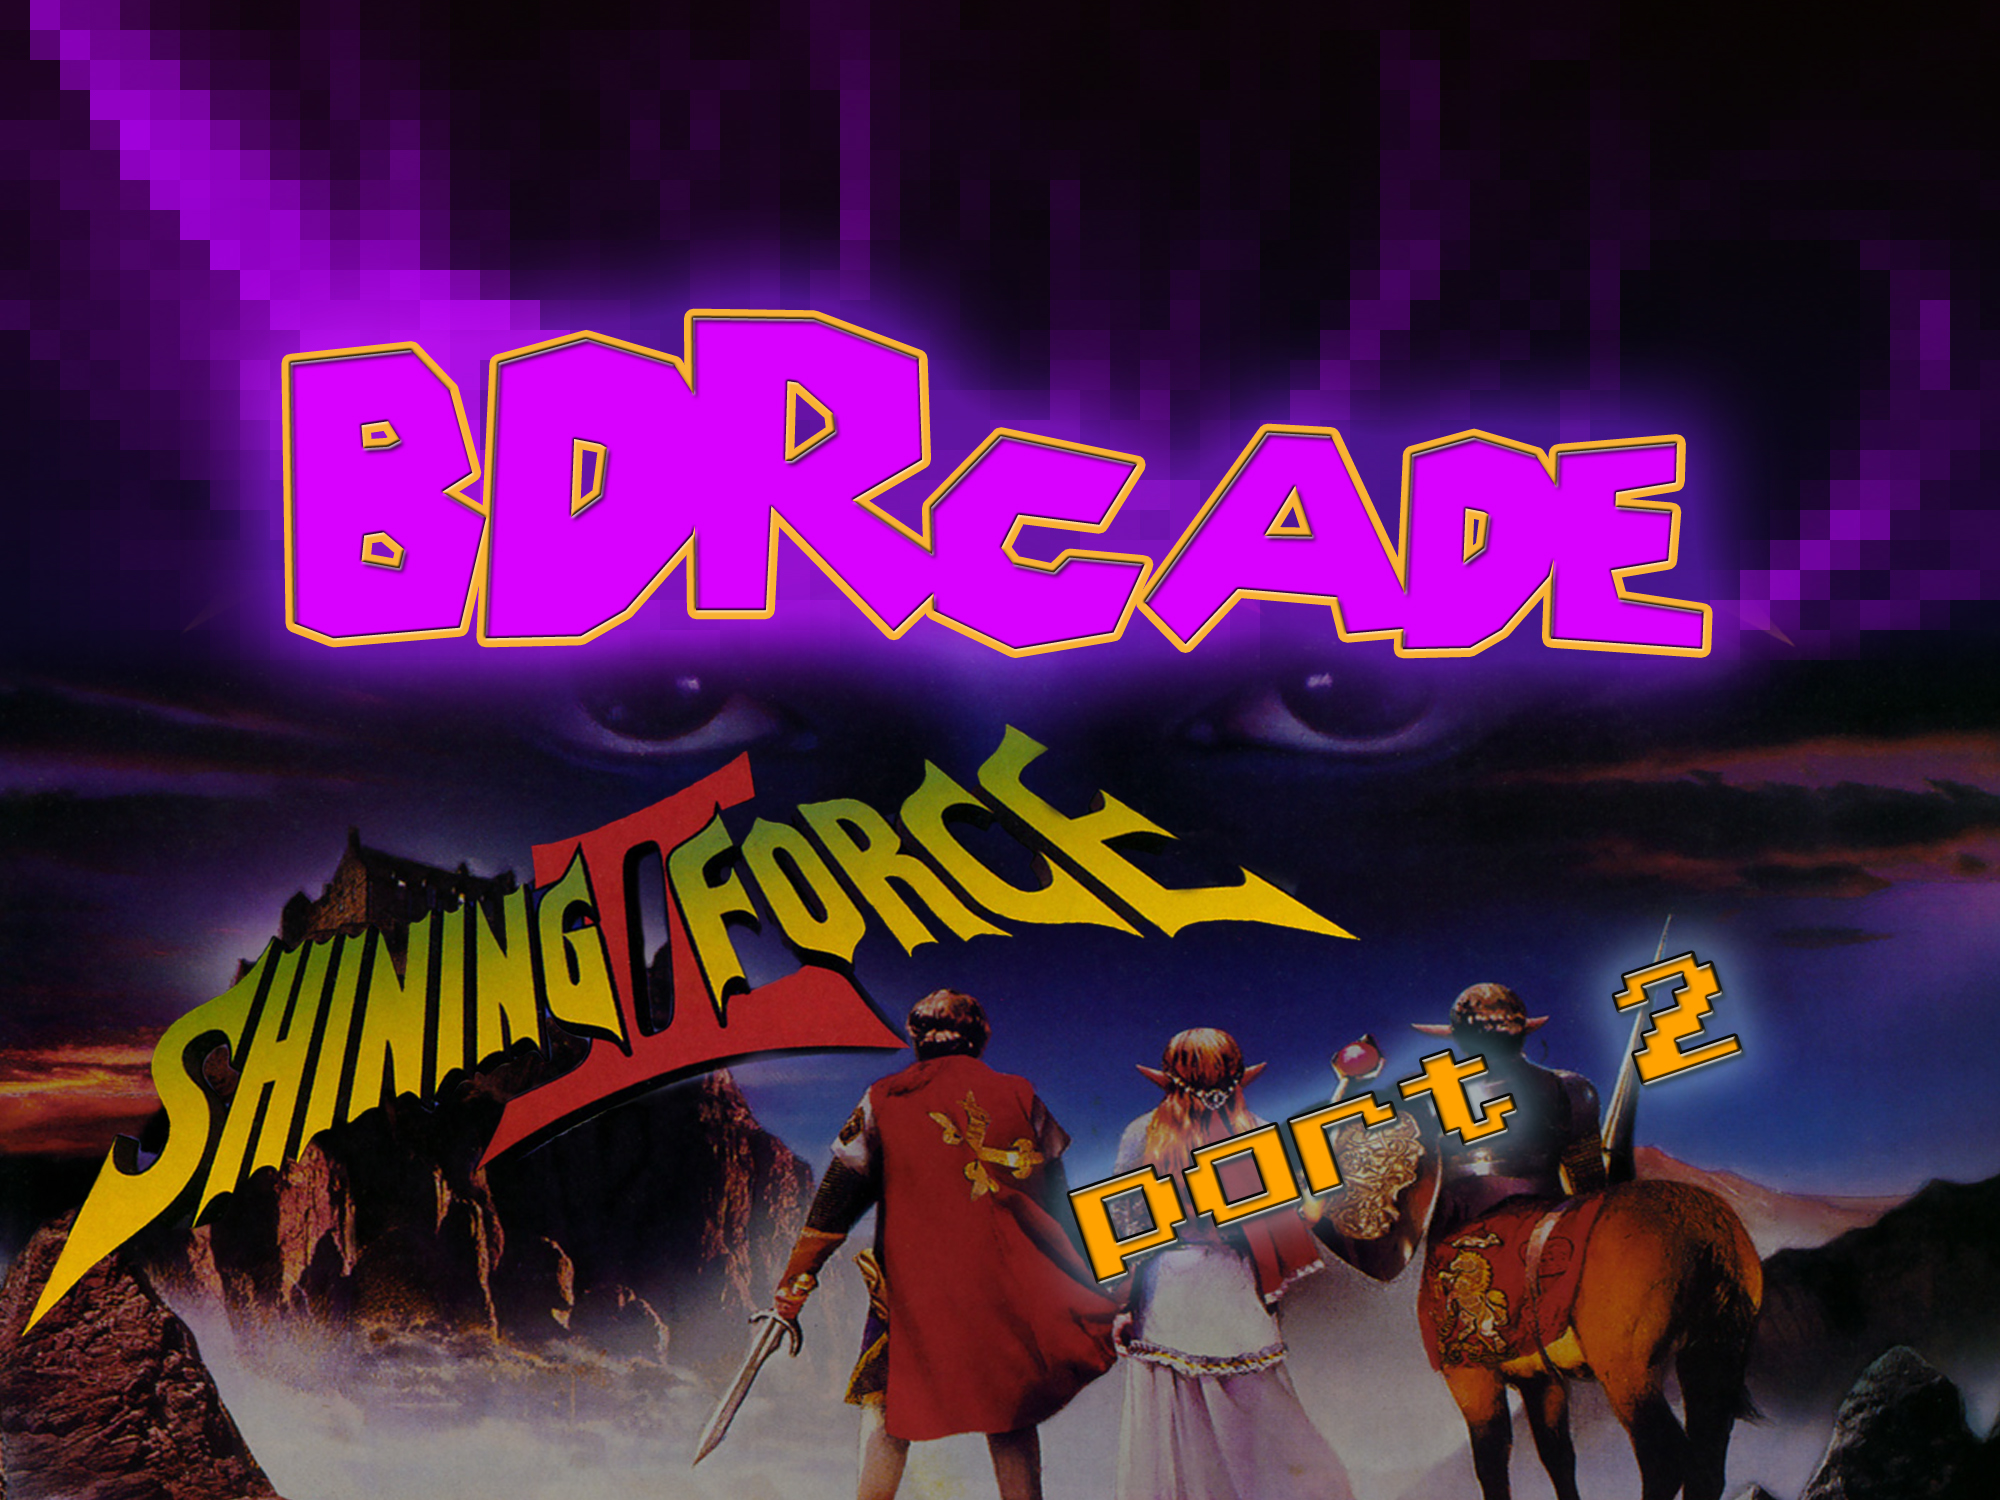 Shining Force II: What Difficulty Setting is This? – PART 2 – BDRcade